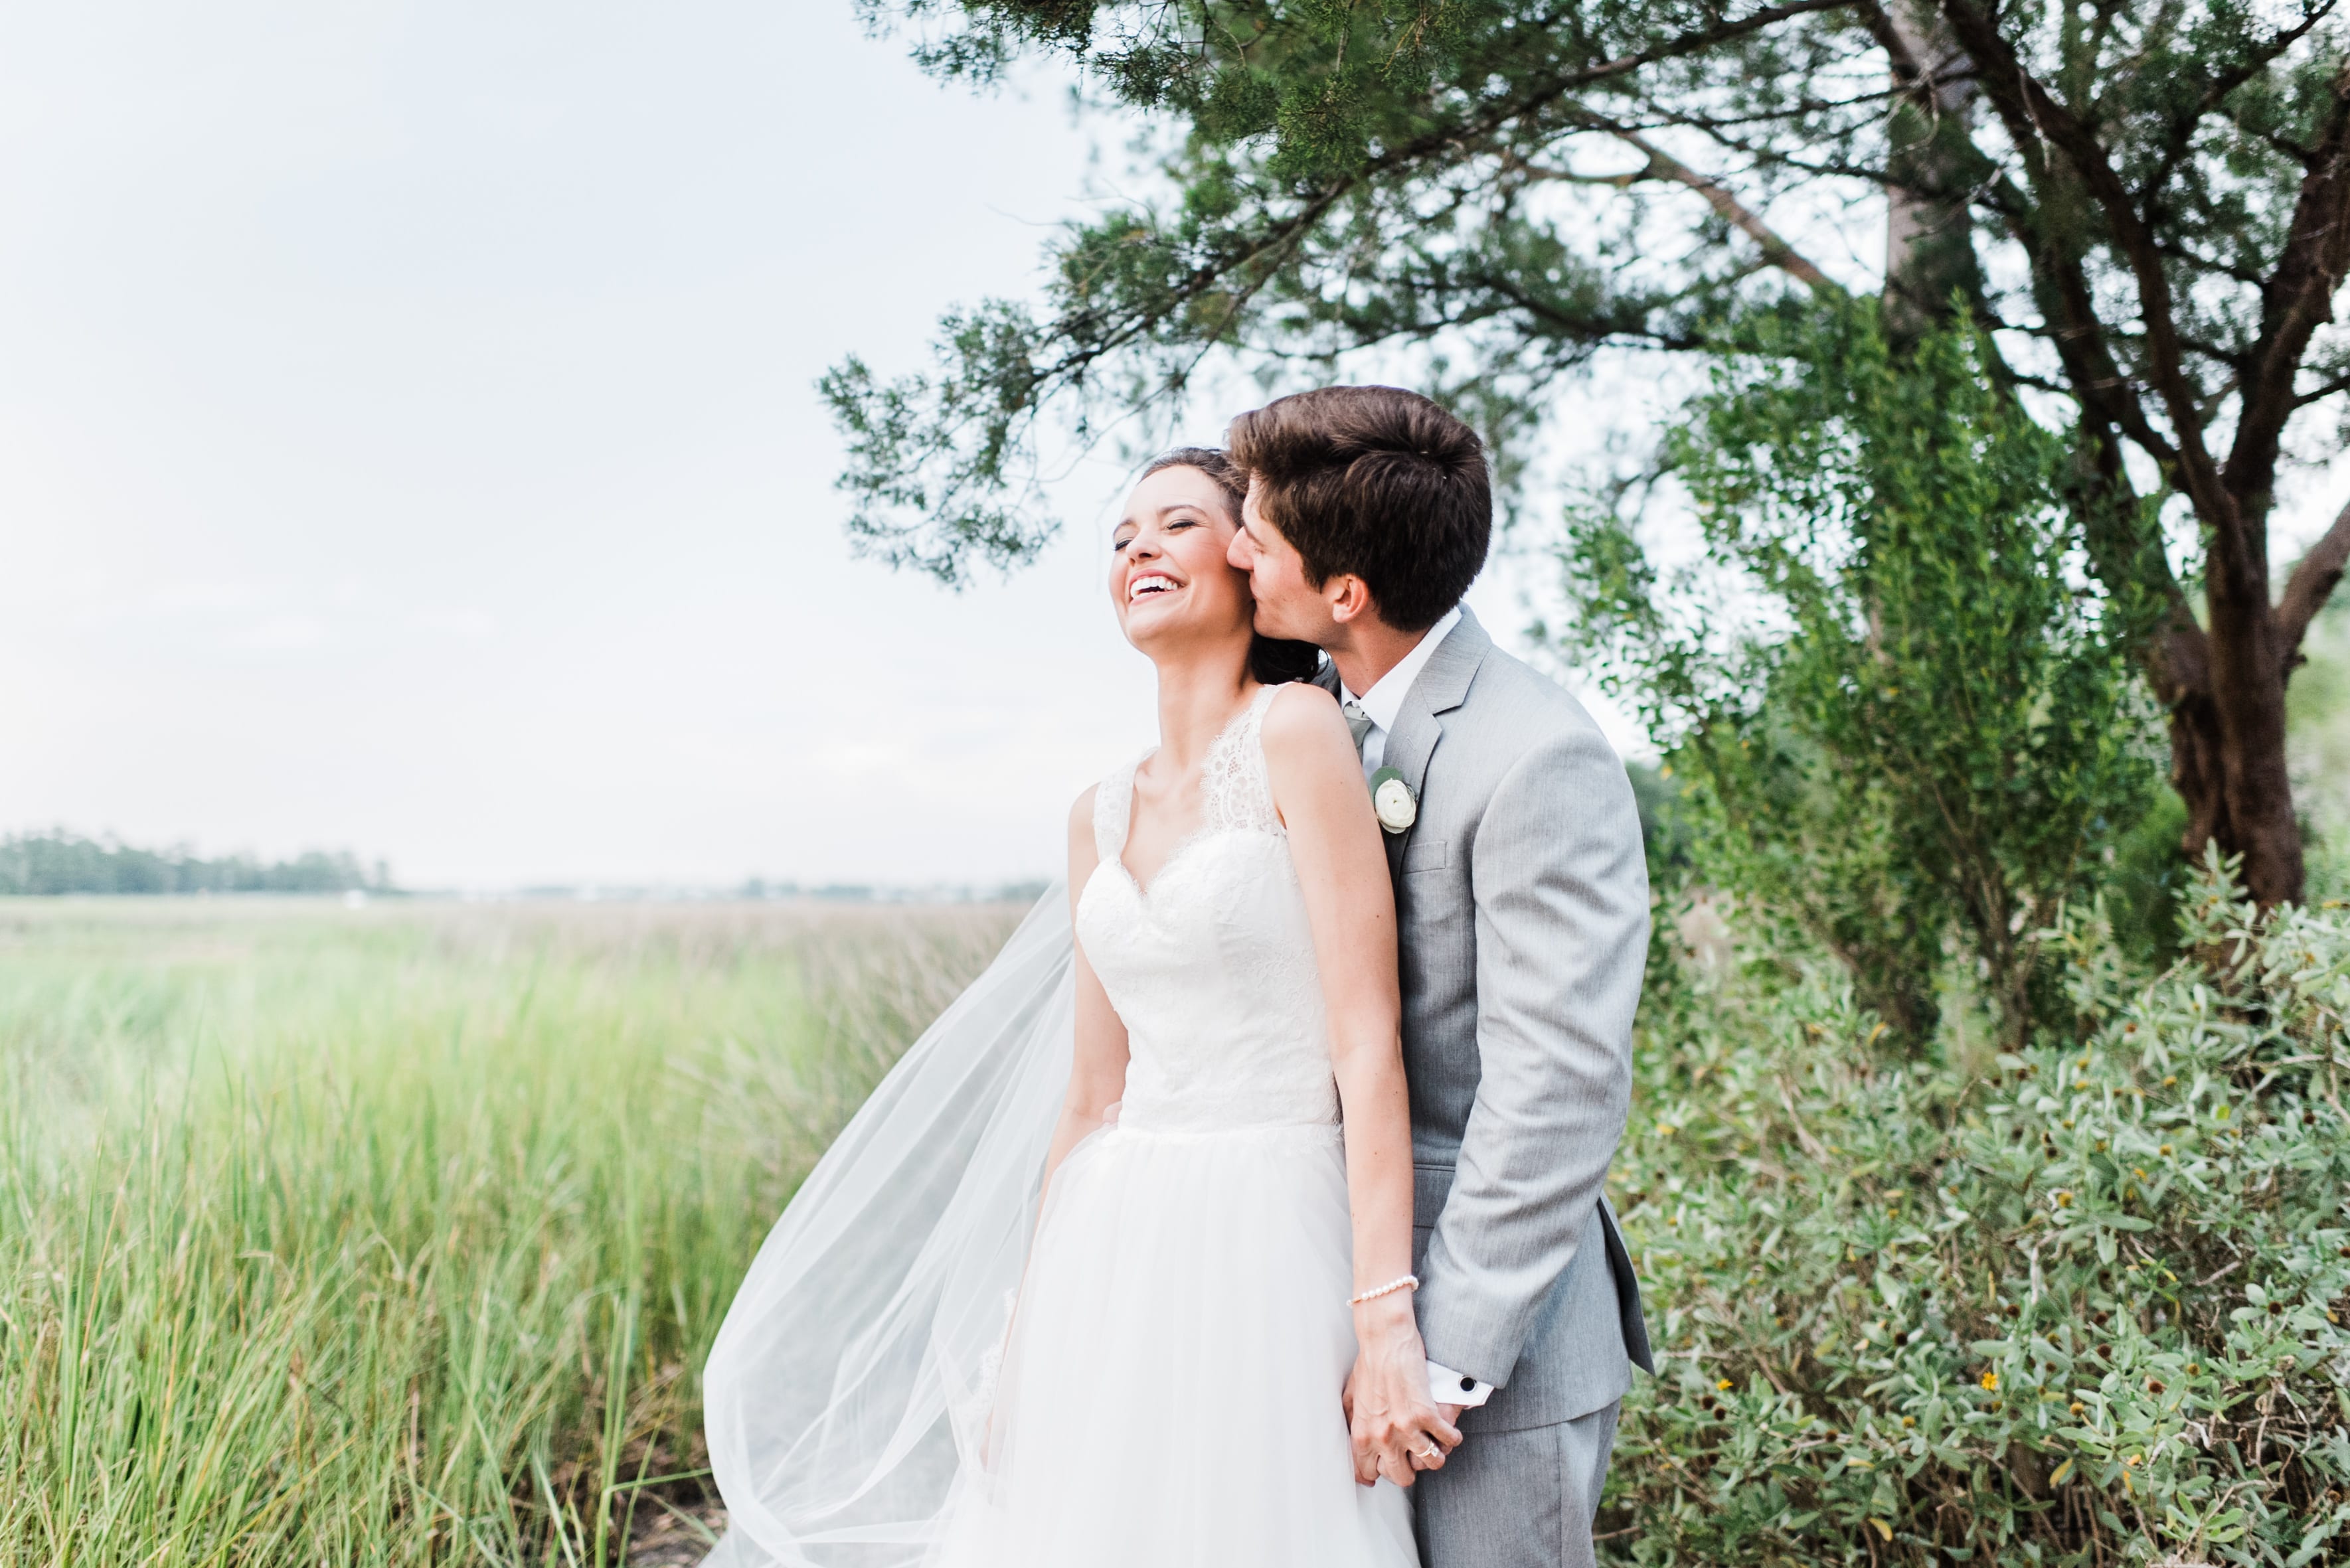 Boone Hall Plantation wedding with Ooh Events photo